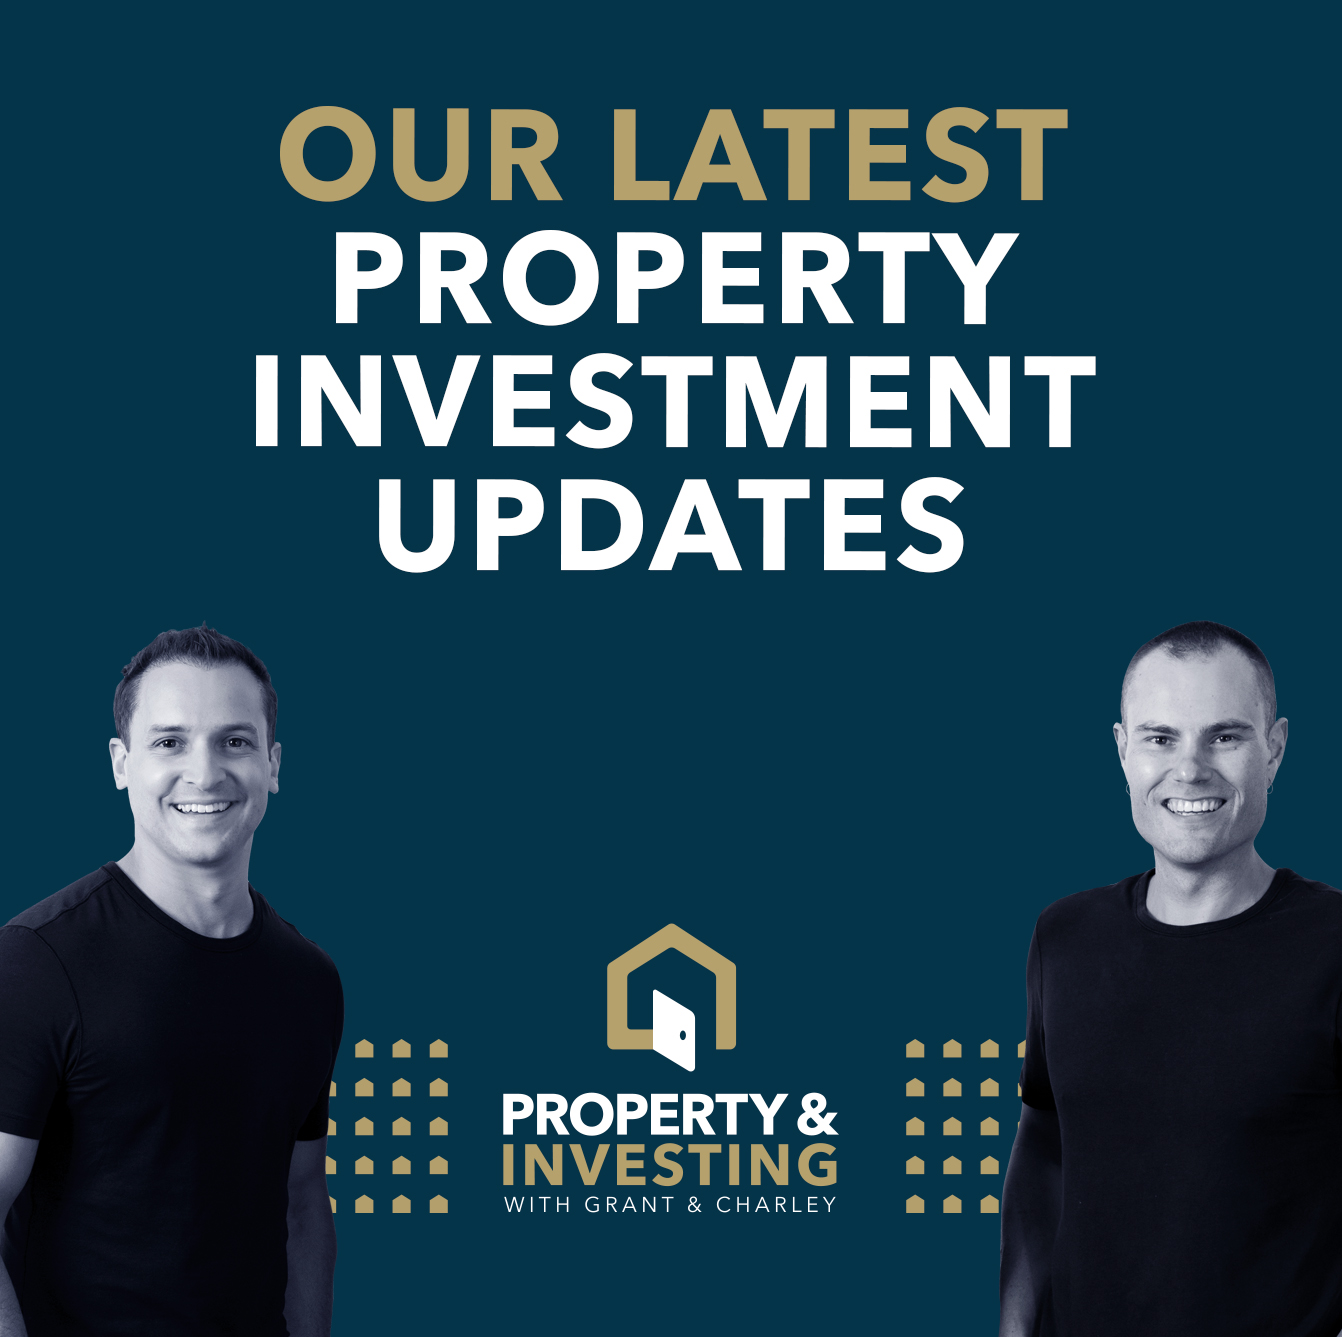 Our Latest Property Investment Updates